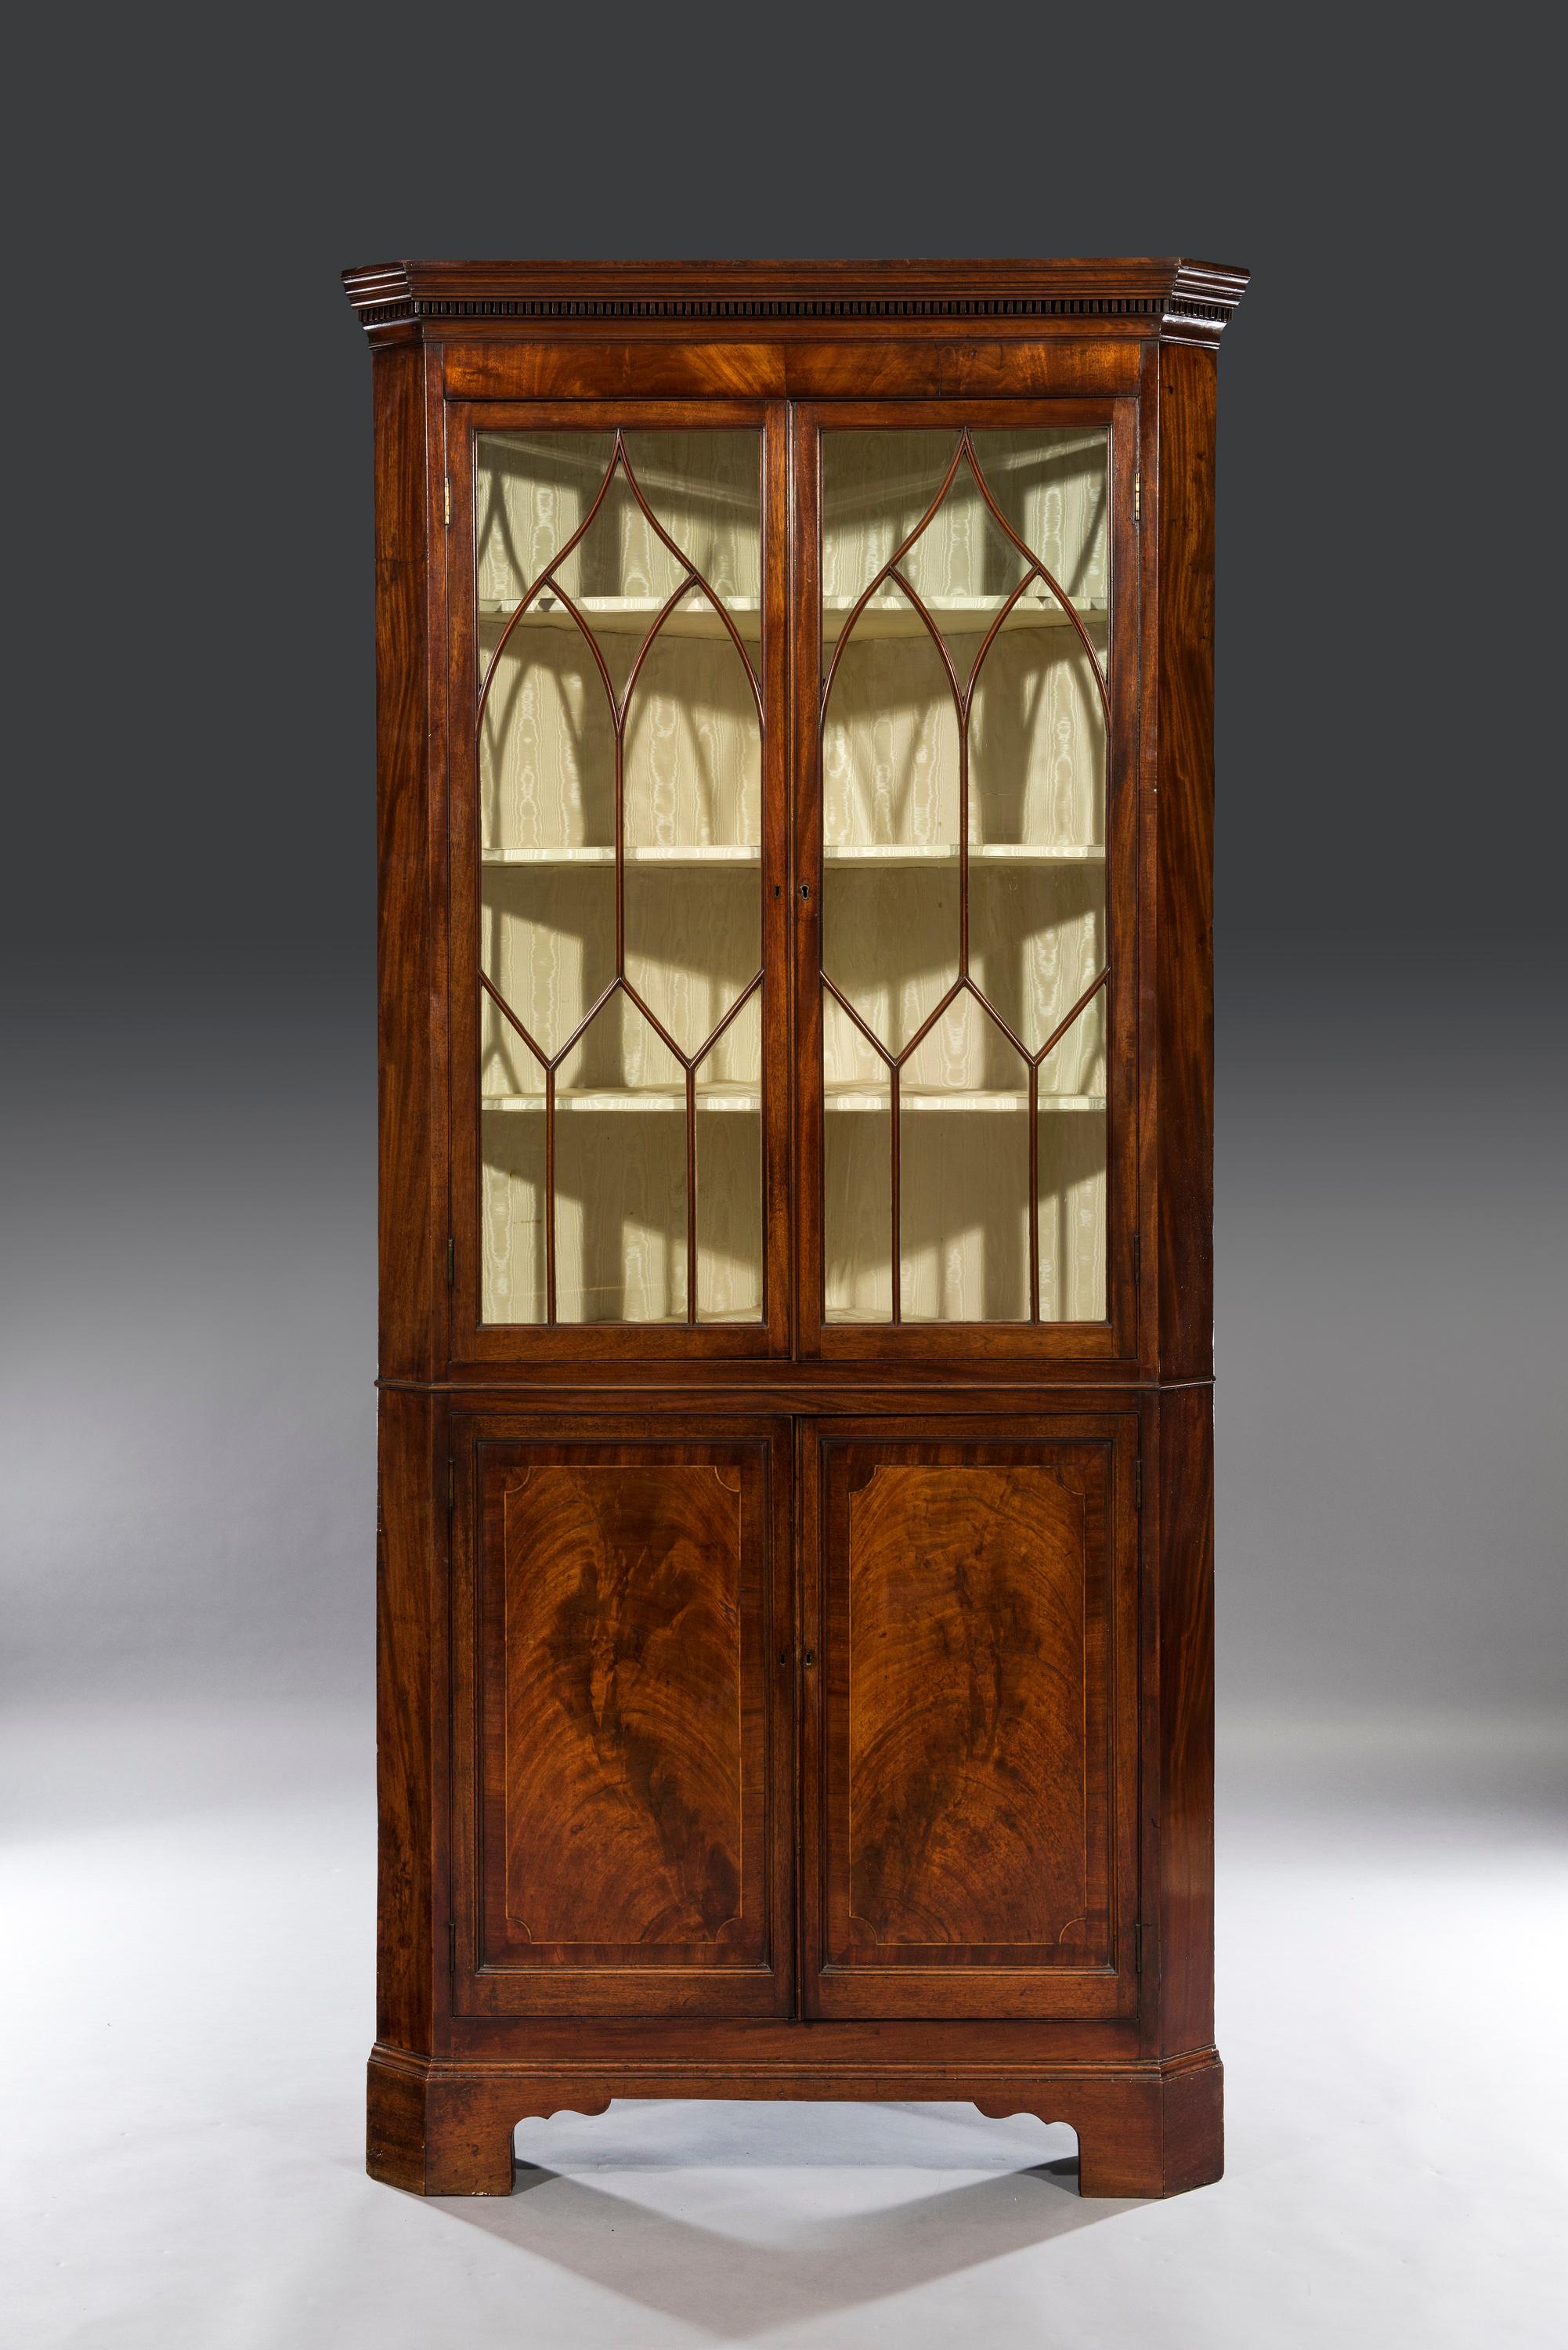 The standing corner cupboard is of impressive size and comes in one piece. The fitted moulded top with a dog-tooth dental moulding sits above a flamed veneered frieze and astragal glazed doors which open to silk lined fitted shelves.  The glazed top